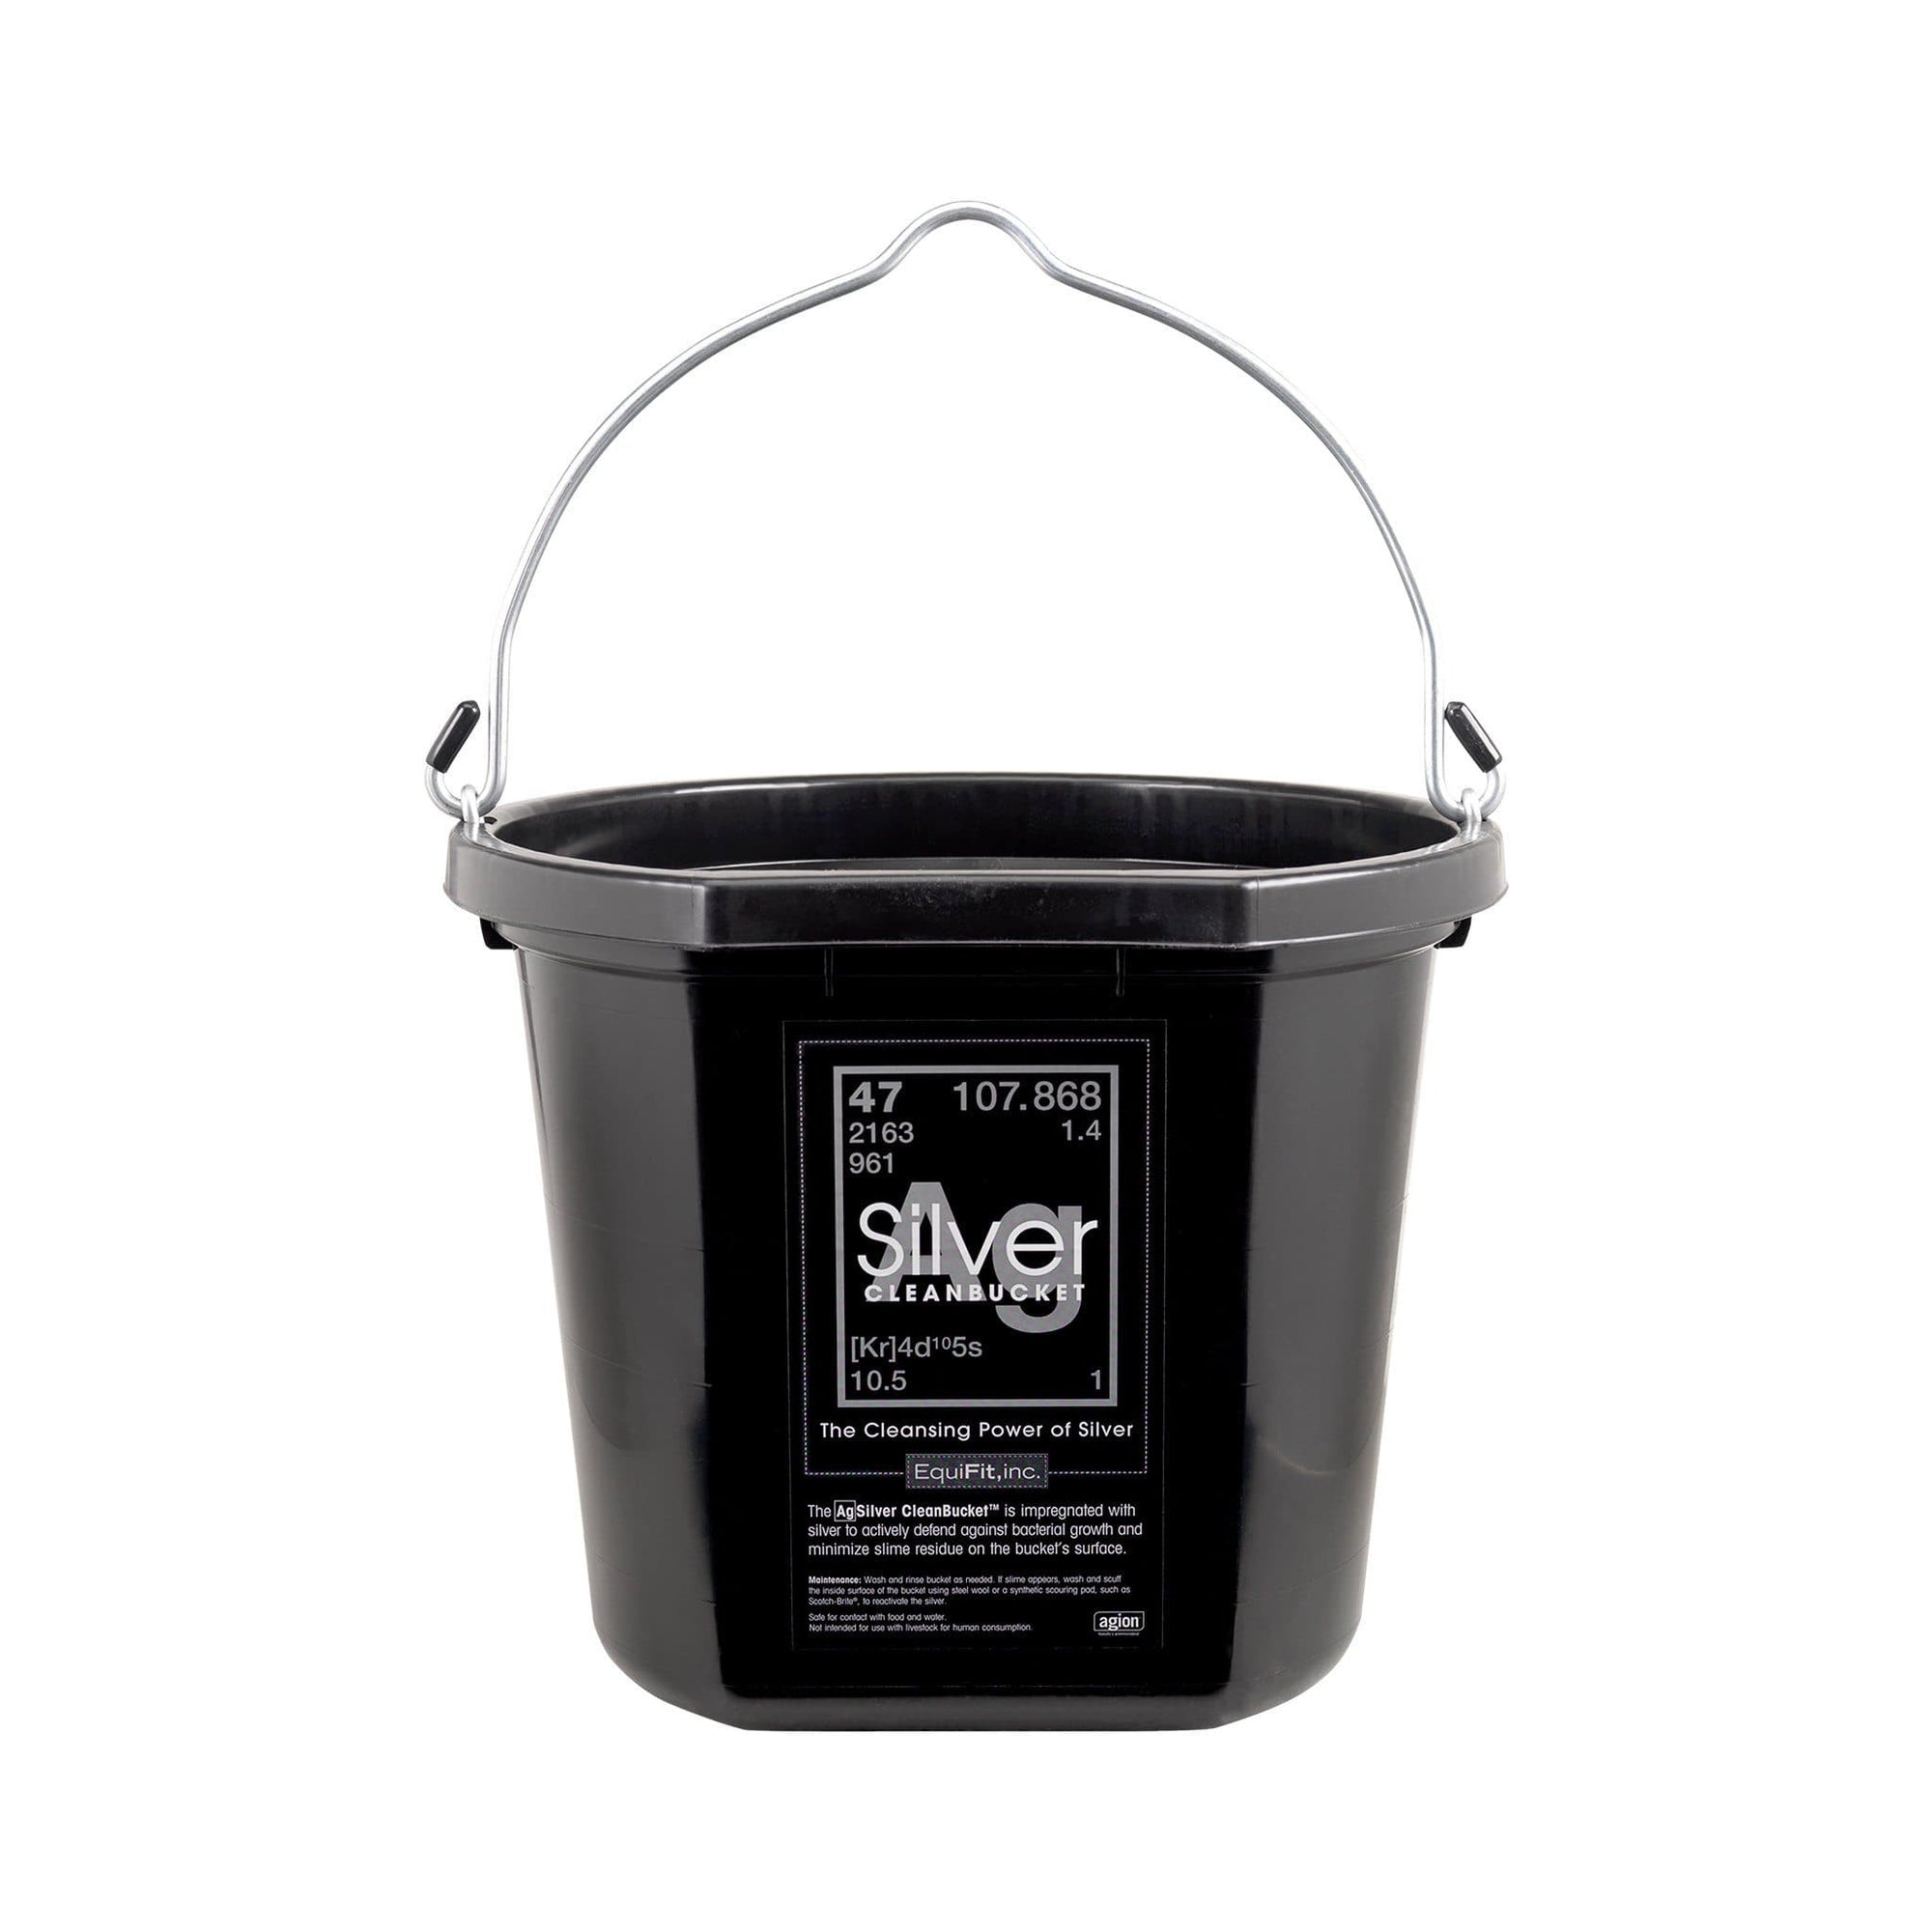 AgSilver CleanBucket is embedded with Ionic Silver to control bacterial growth